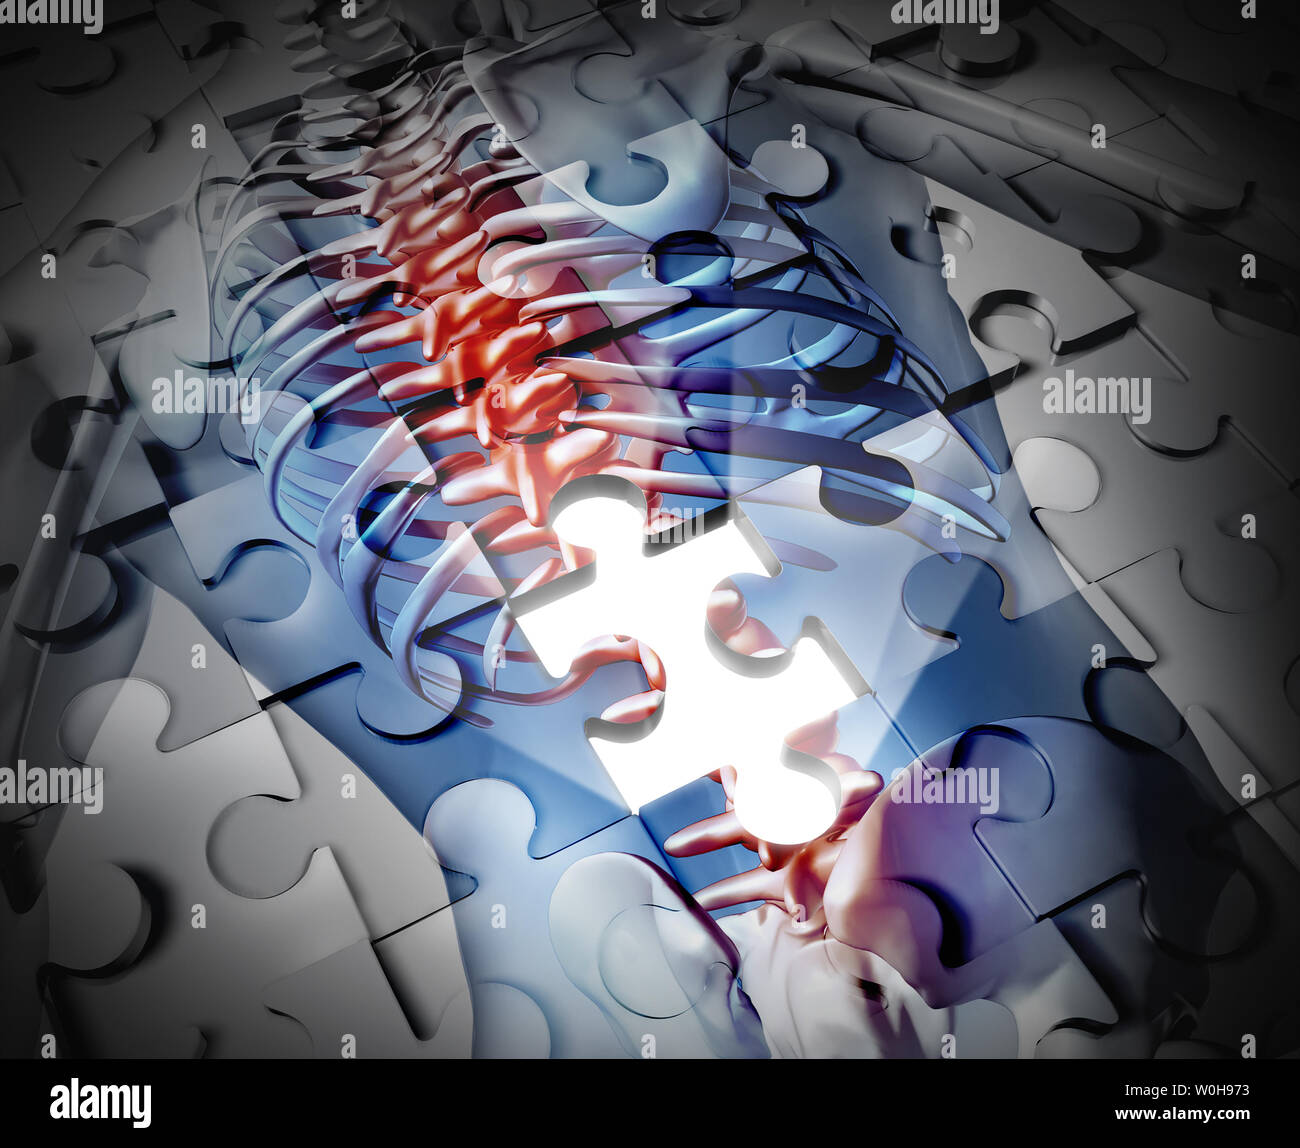 Physiotherapy and back ache pain rehabilitation as a physical therapy treatment concept in a 3D illustration style. Stock Photo